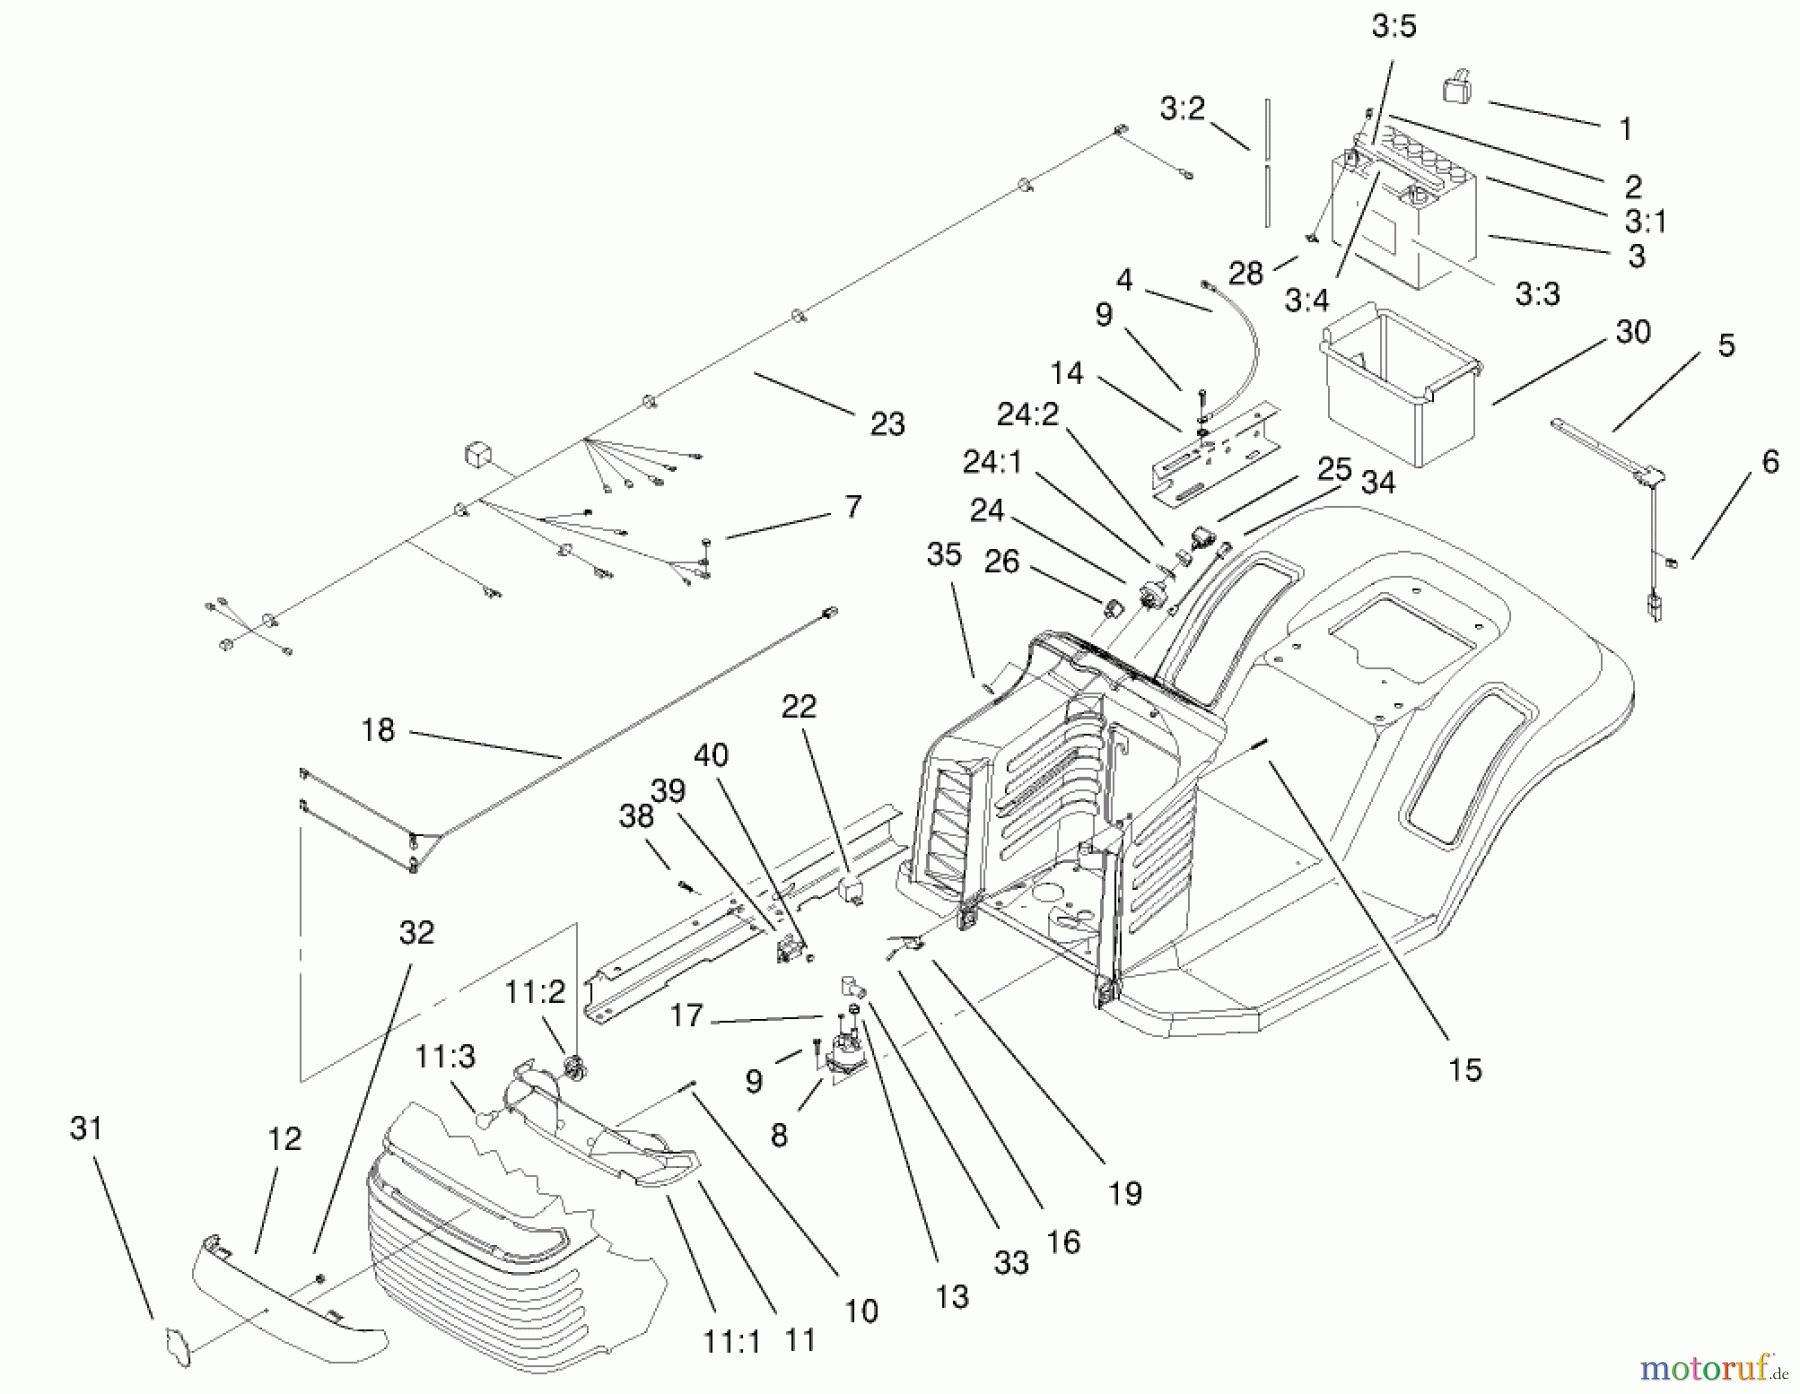  Toro Neu Mowers, Lawn & Garden Tractor Seite 1 77104 (16-38H) - Toro 16-38H Lawn Tractor, 2000 (200000001-200999999) ELECTRICAL COMPONENTS ASSEMBLY